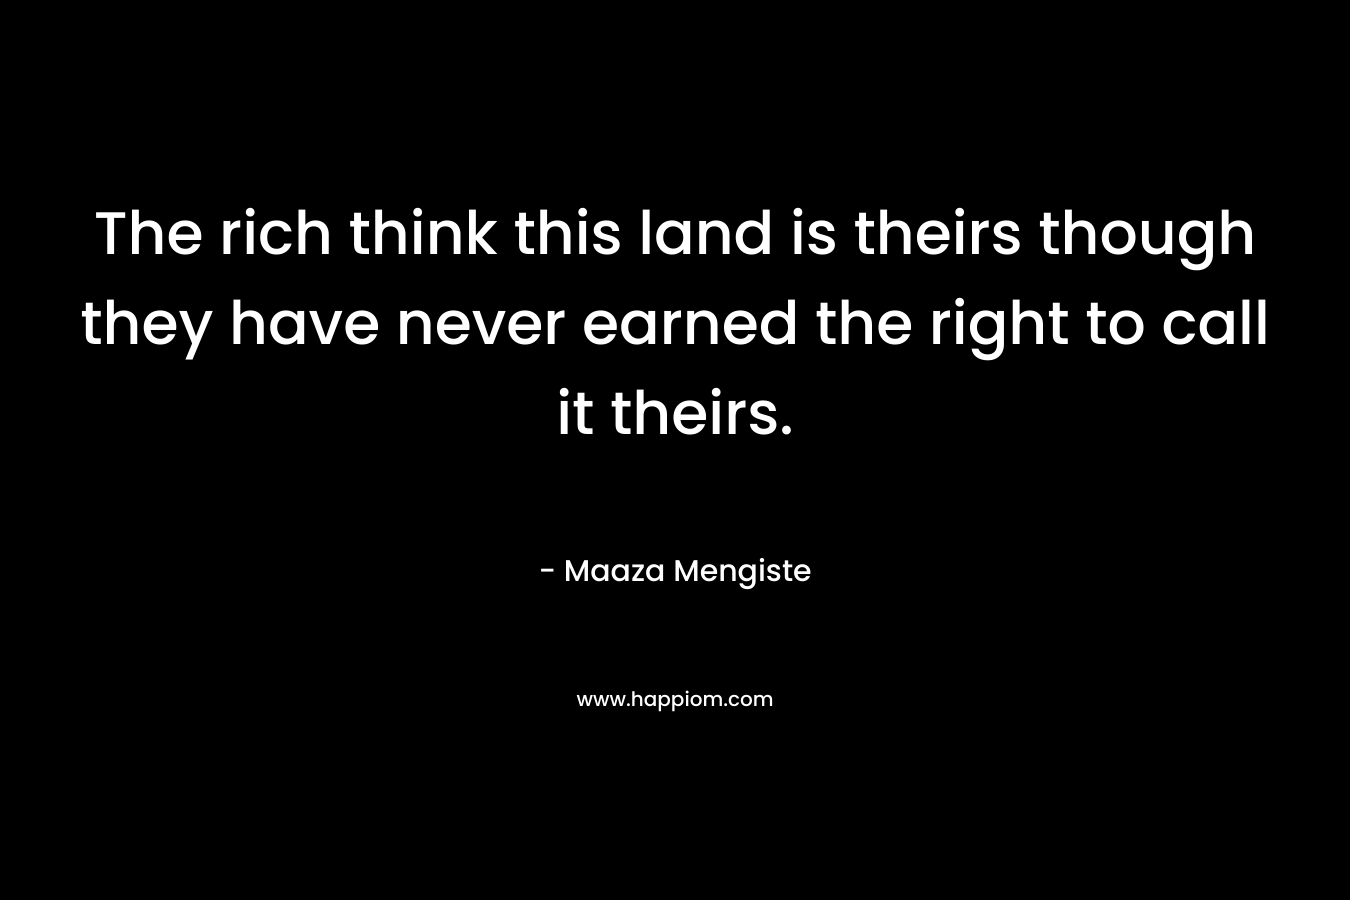 The rich think this land is theirs though they have never earned the right to call it theirs. – Maaza Mengiste